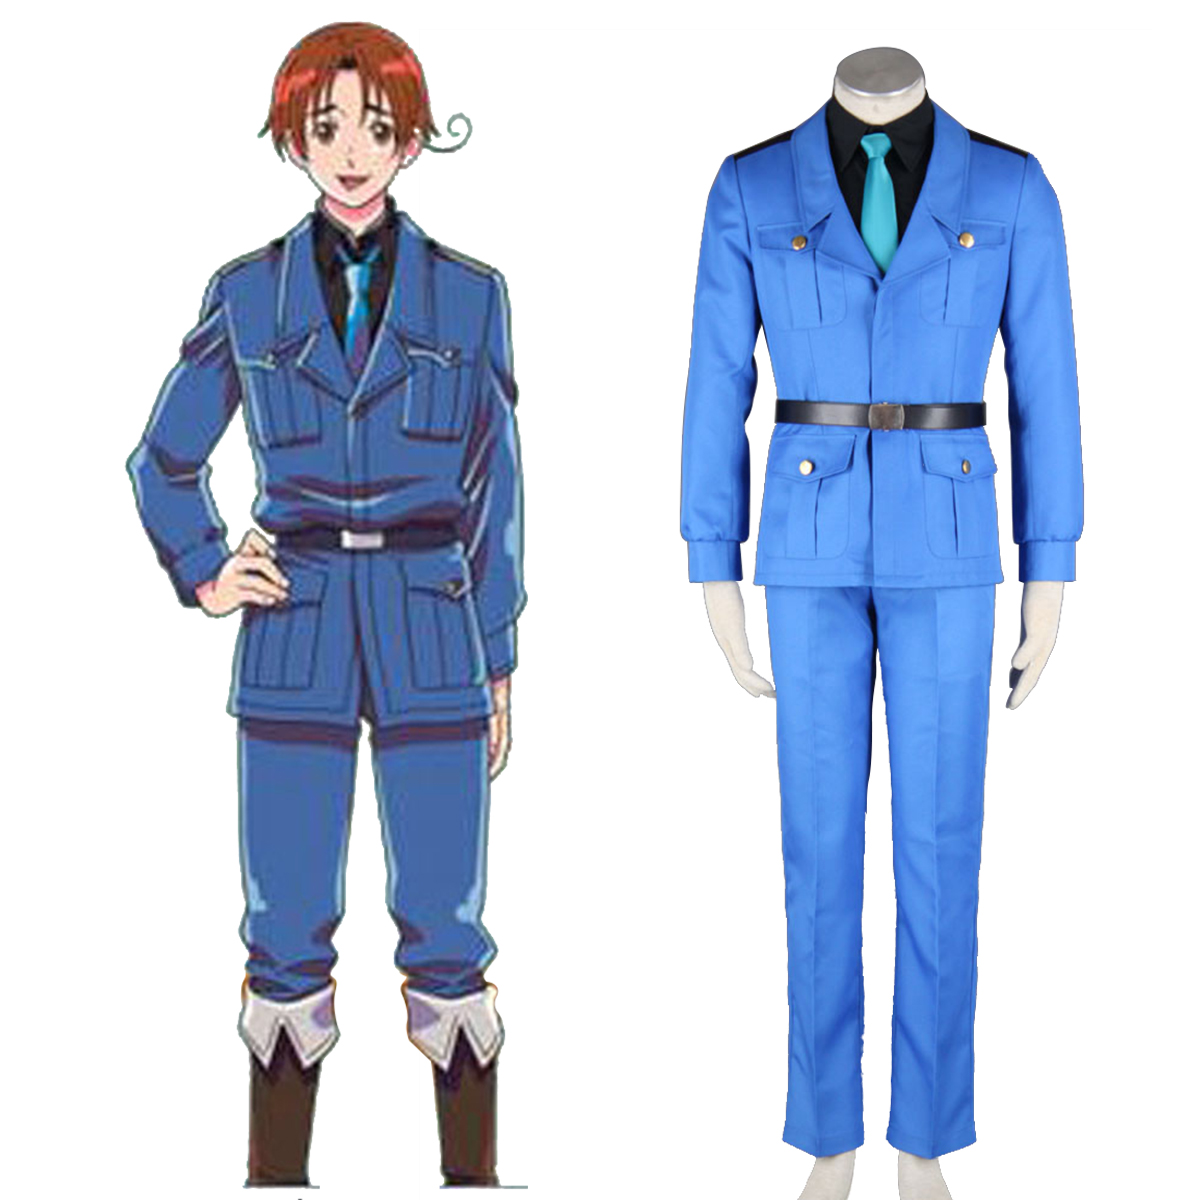 Axis Powers Hetalia APH North Italy Feliciano Vargas 3 Cosplay Costumes New Zealand Online Store